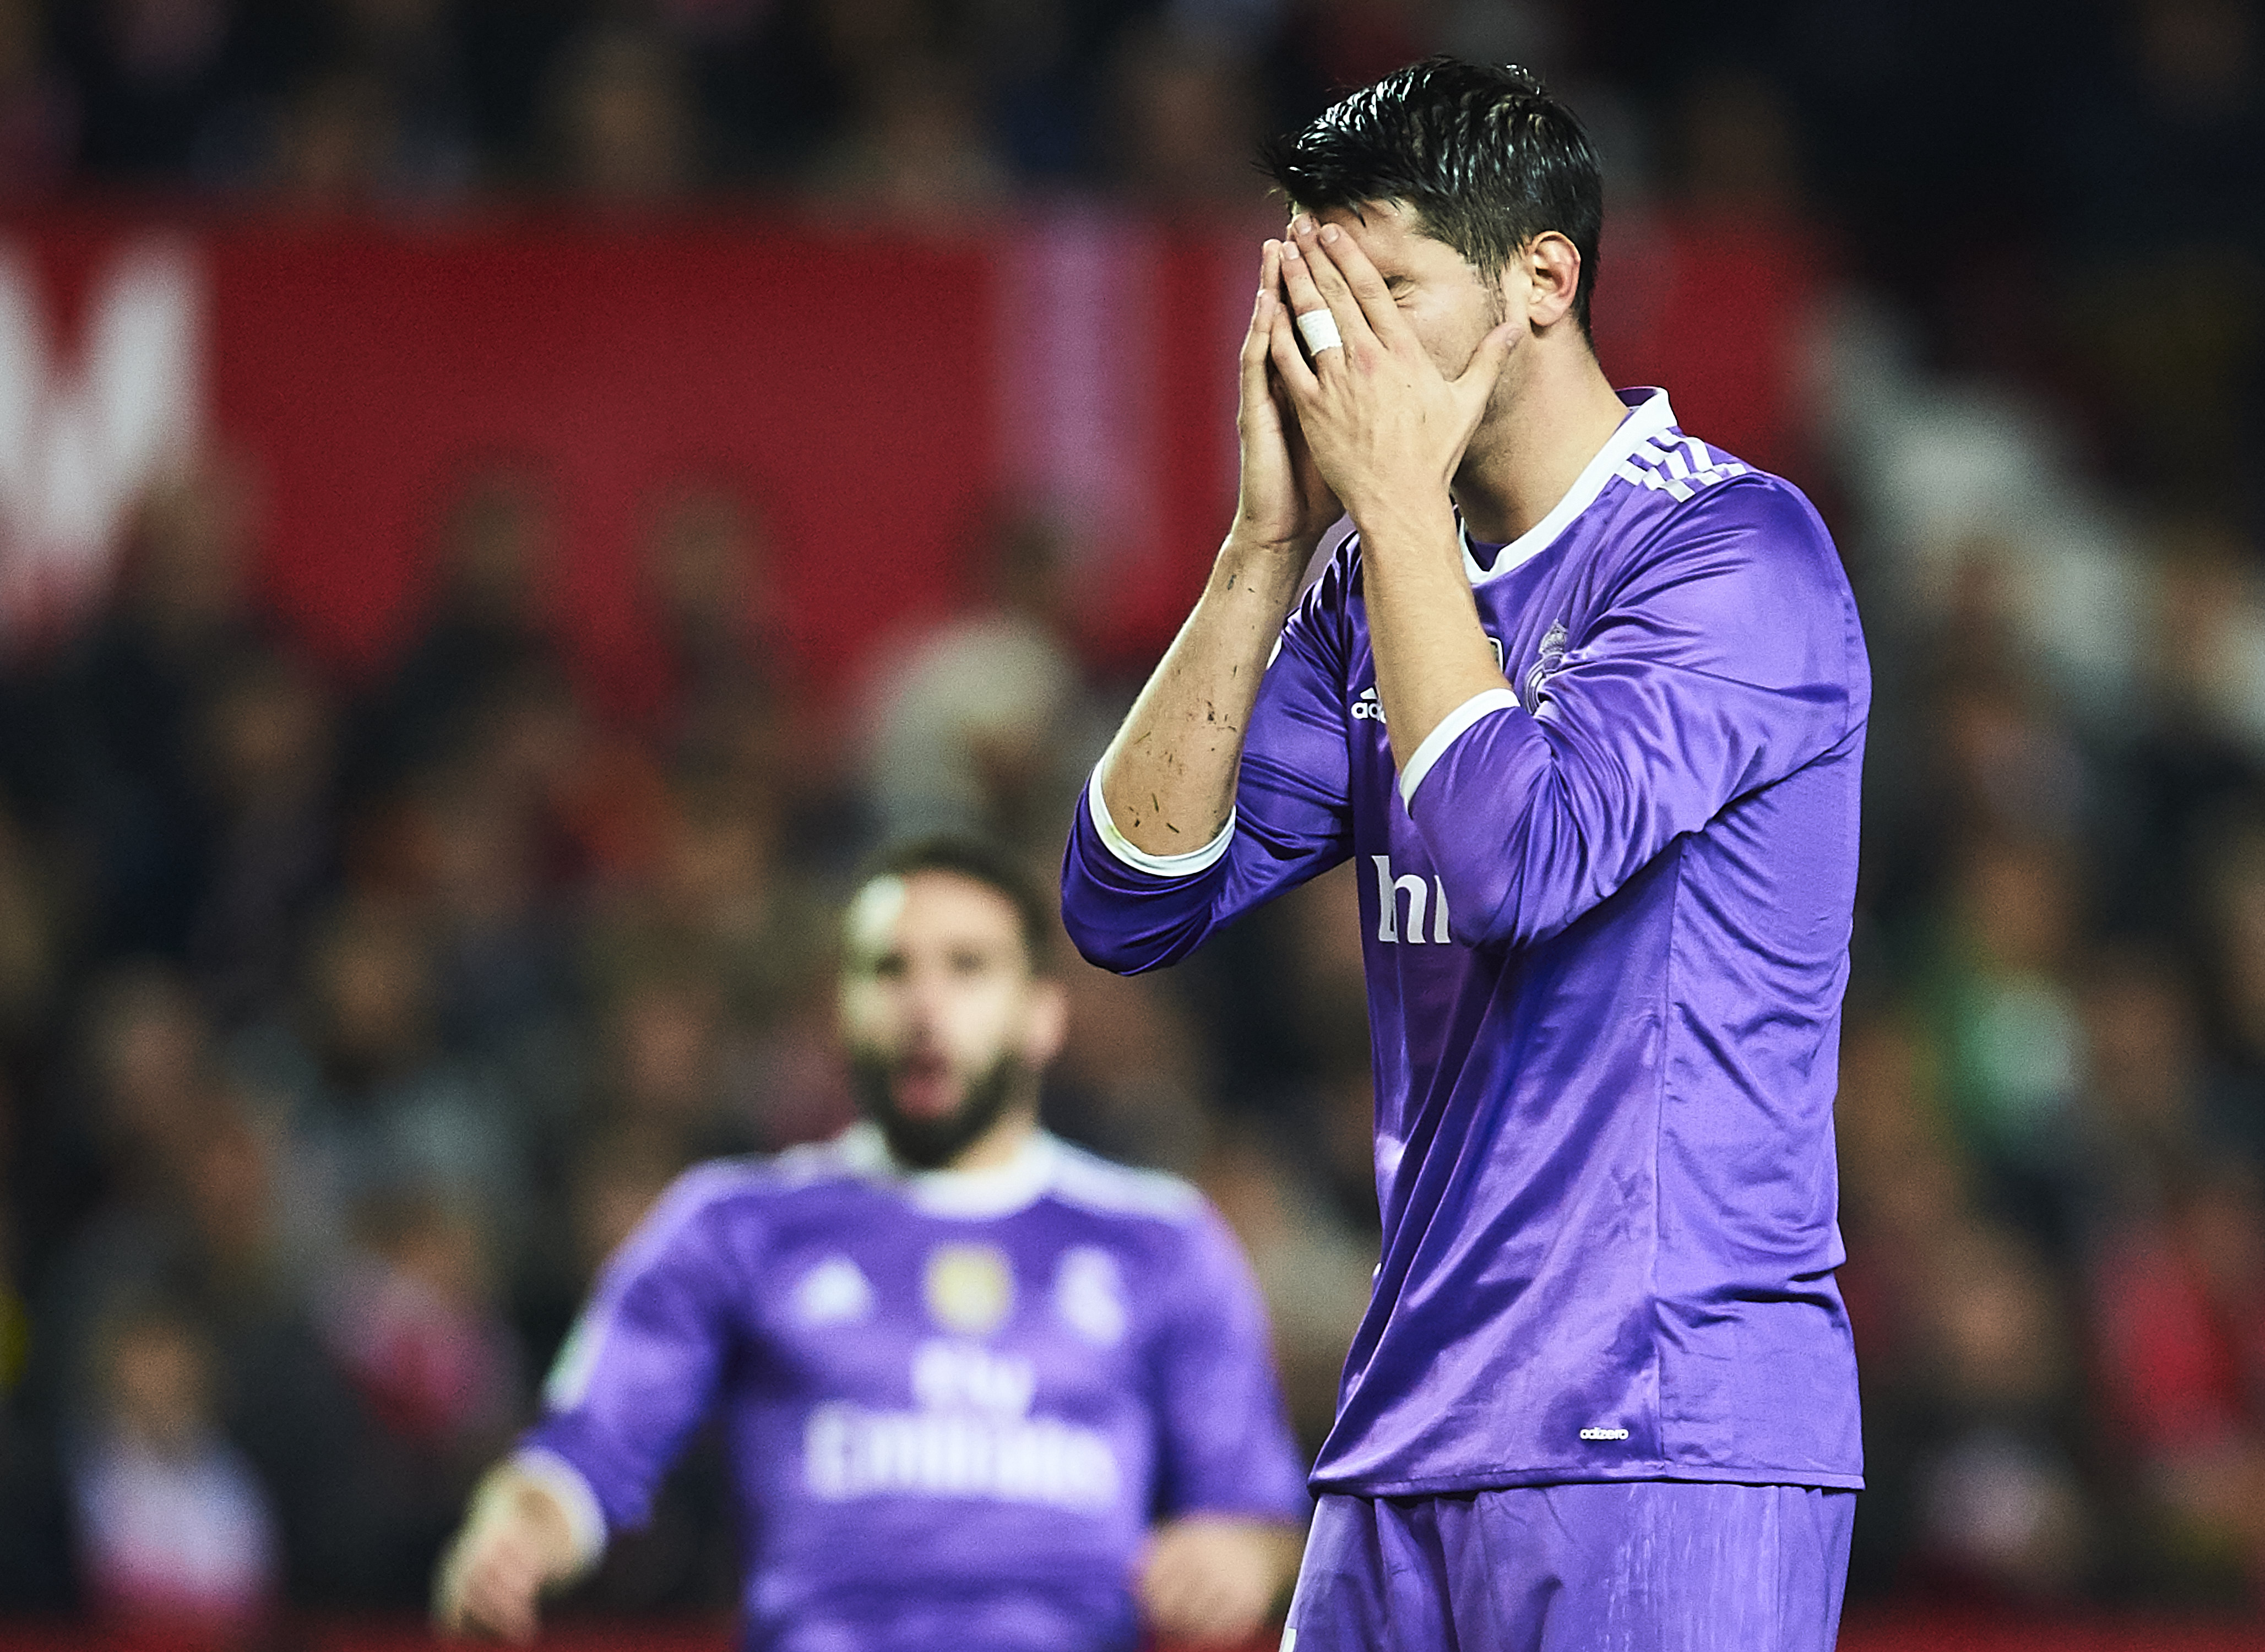 SEVILLE, SPAIN - JANUARY 12:  Alvaro Morata of Real Madrid CF reacts after missing a chance og al during the Copa del Rey Round of 16 Second Leg match between Sevilla FC vs Real Madrid CF at Ramon Sanchez Pizjuan stadium on January 12, 2017 in Seville, Spain.  (Photo by Aitor Alcalde/Getty Images)